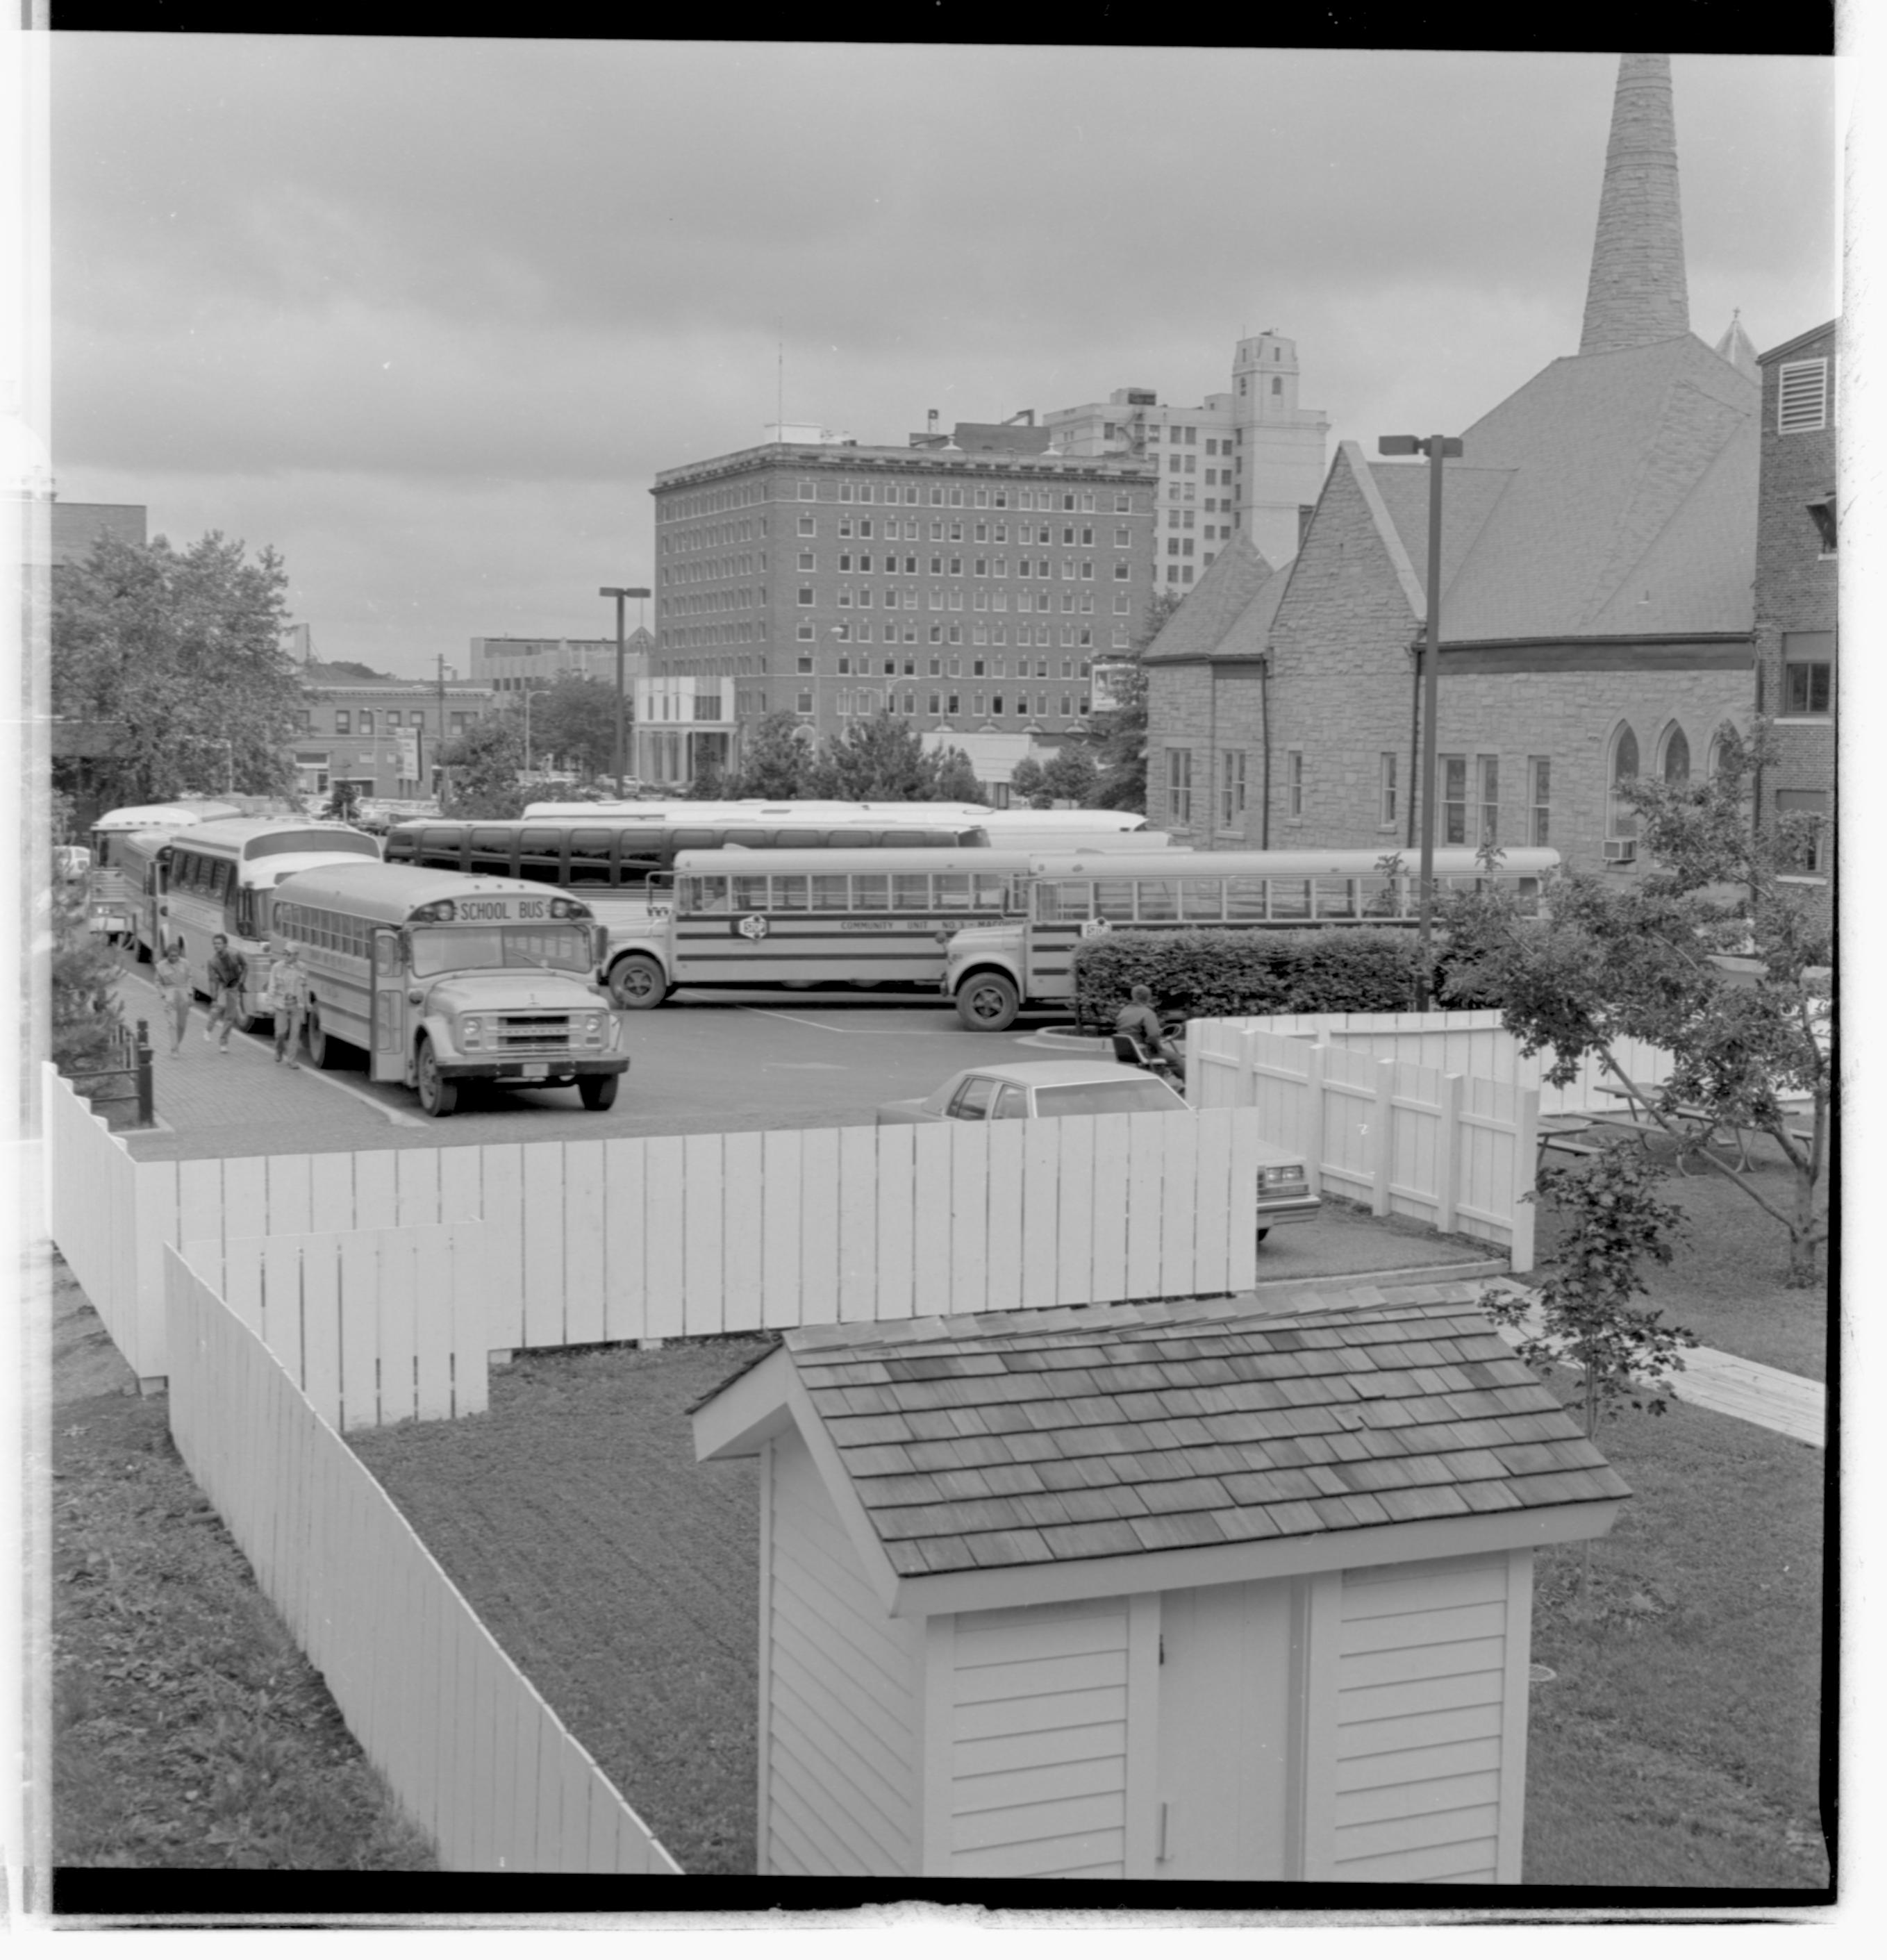 Parking lots - Bus lot, Grace Lutheran Church on right, Lyon House shed in foreground, former Leland Hotel in background, maintenance staff on mower in alley looking Northwest Bus, Parking Lot, Grace Lutheran Church, Lyon Shed